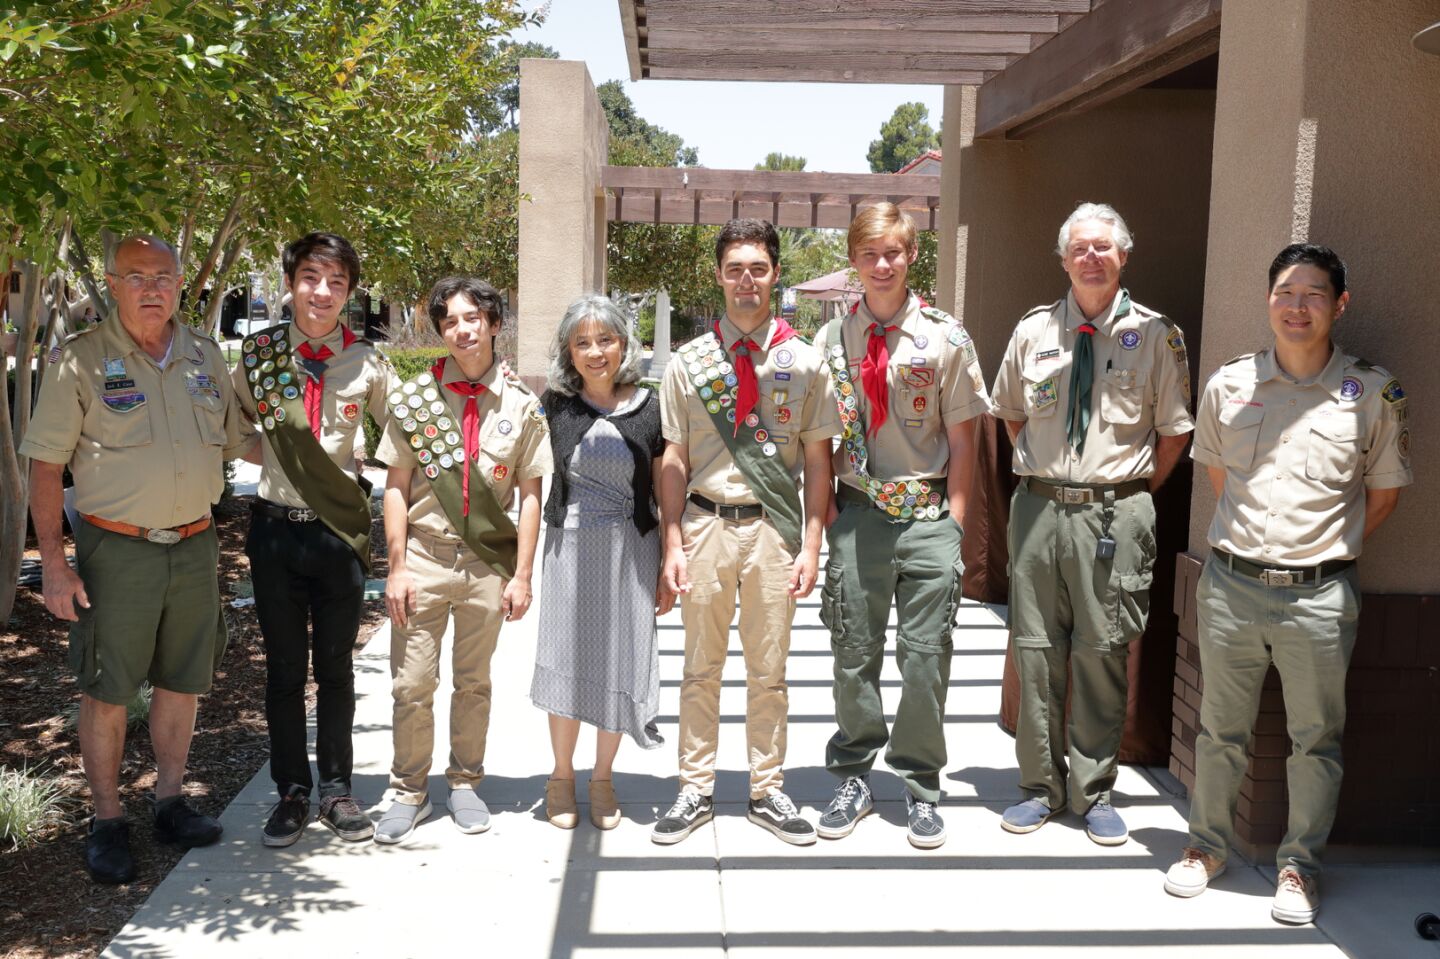 Jack Cater (Asst Zone Committee & Eagle Project Counselor), Eagle Scout candidate David Scuba, Eagle Scout candidate Daniel Scuba, Linda Leong, Ryan Shakiba, Cooper Vincik, Gene Marsh (Scout Master Troop 2000), Chris Kwok (Scout Master Troop 766)